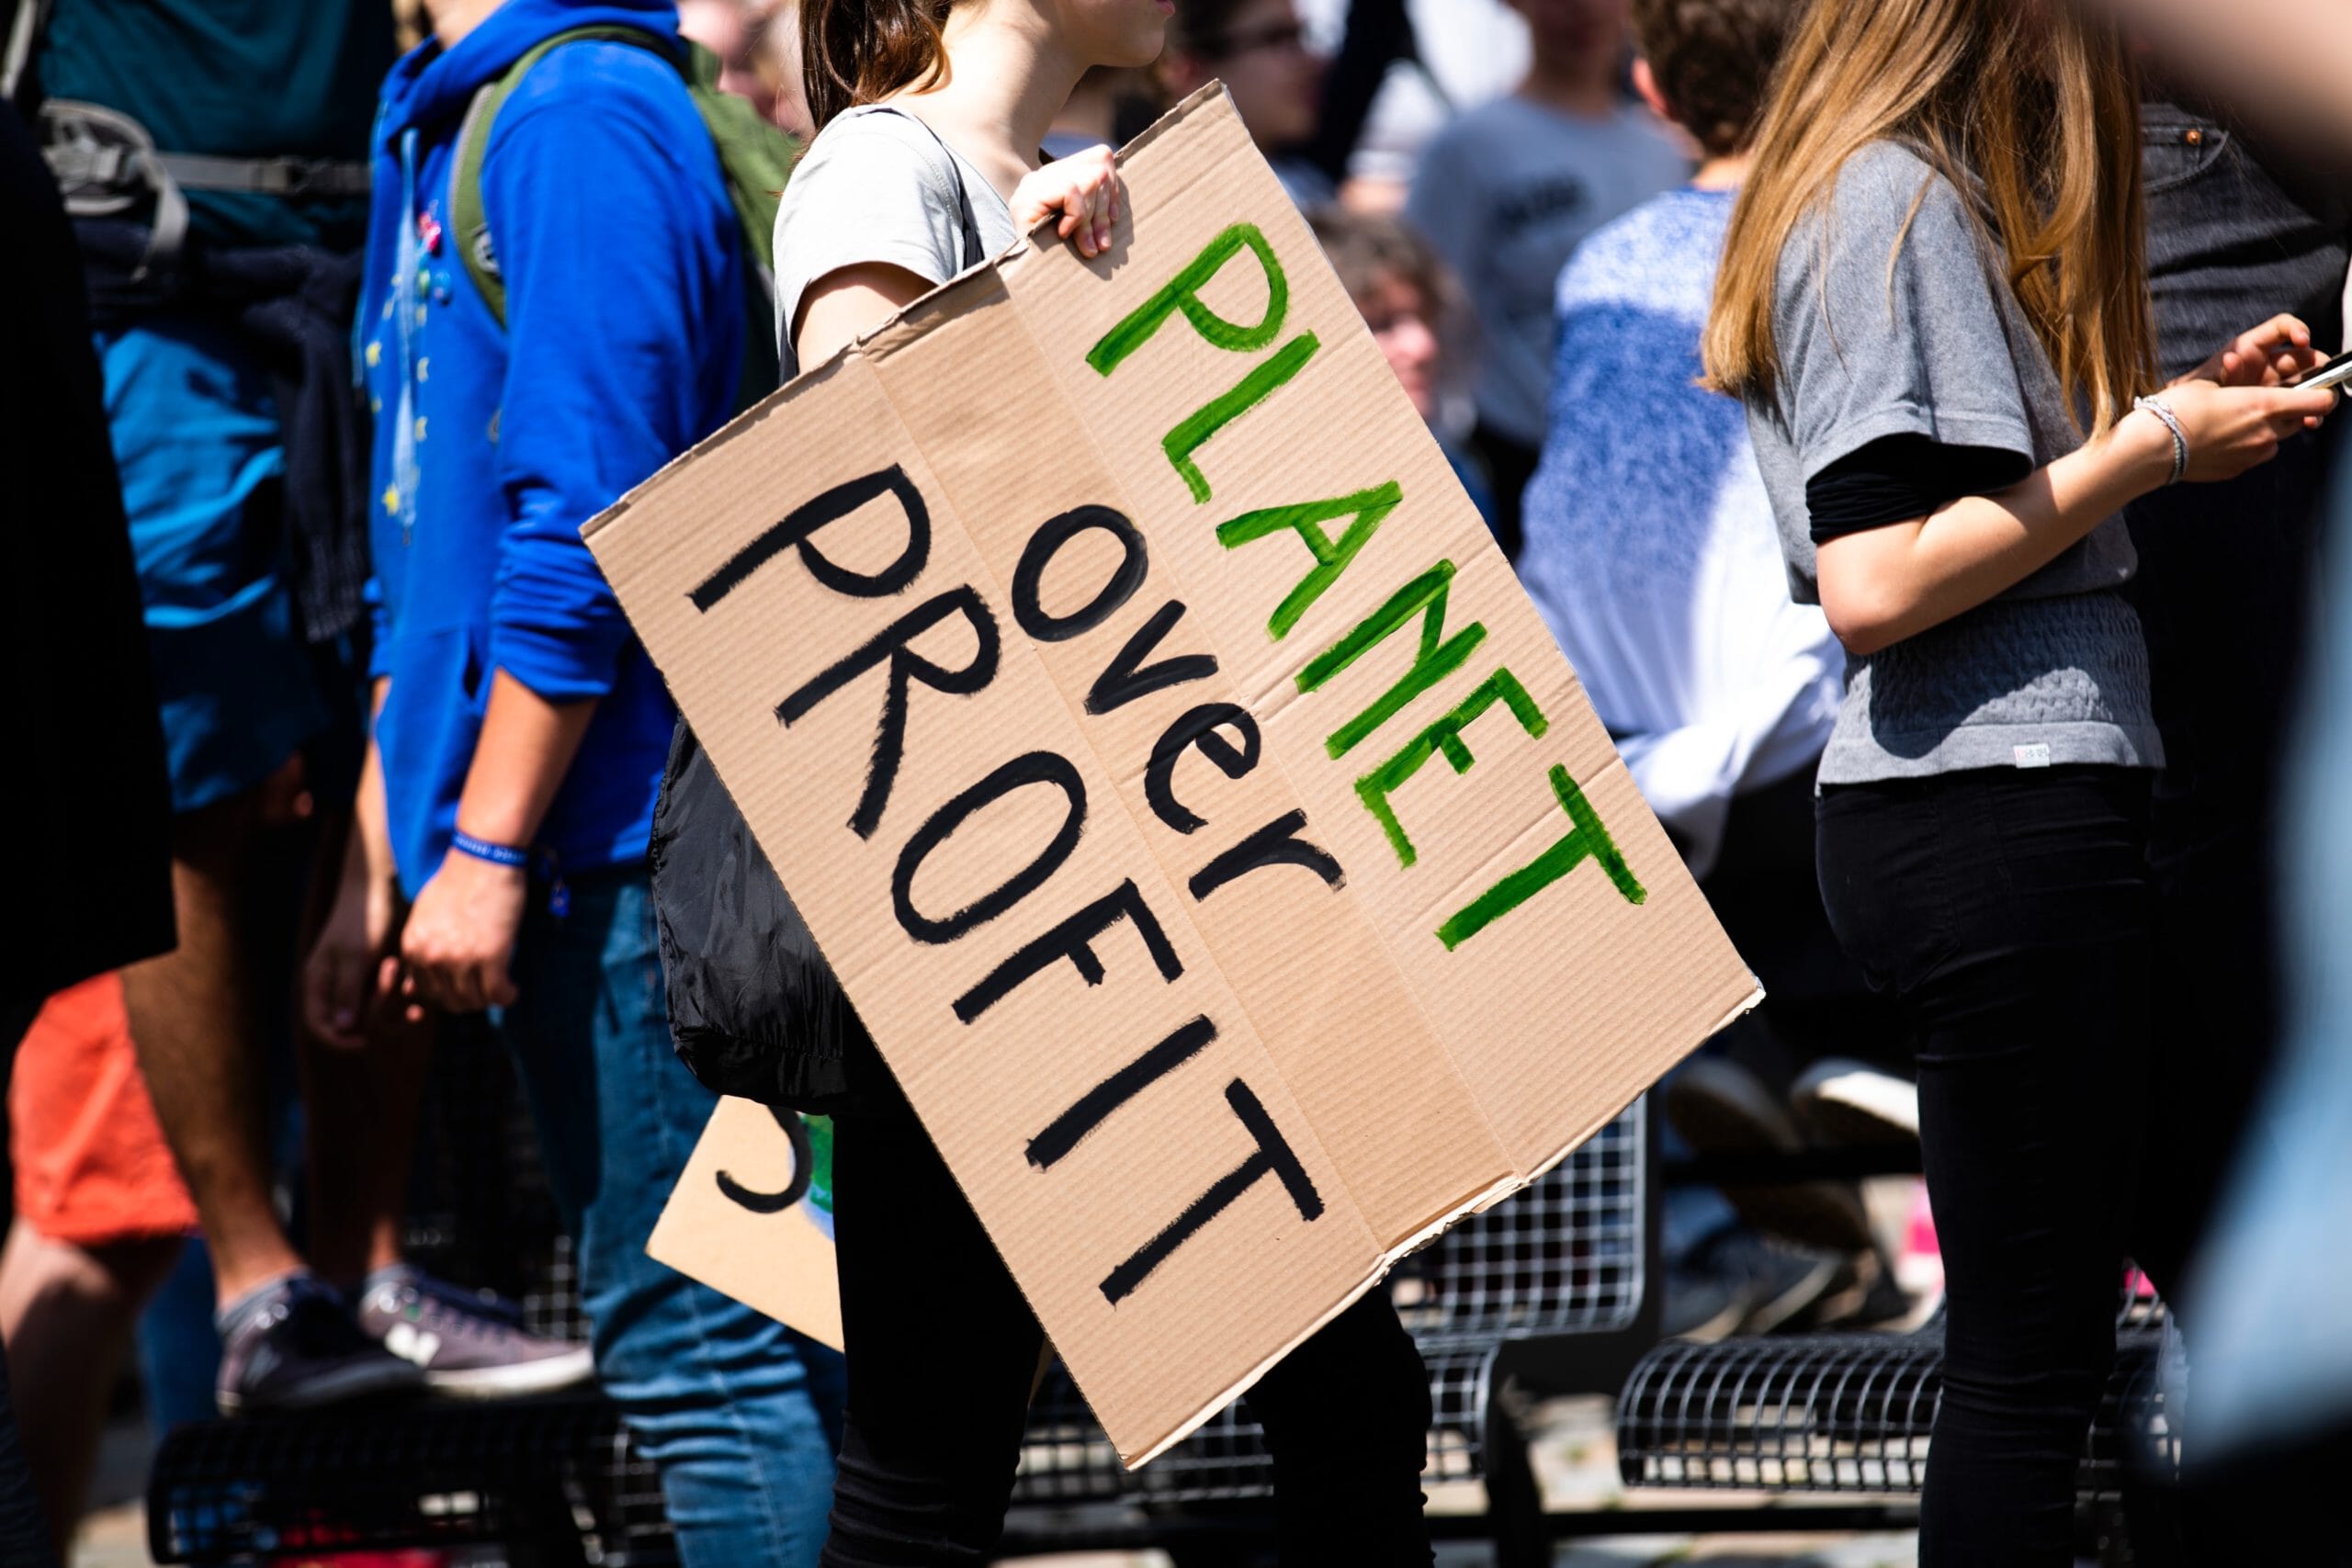 Image of woman at a climate protest carrying a sign that says "Planet over Profit"